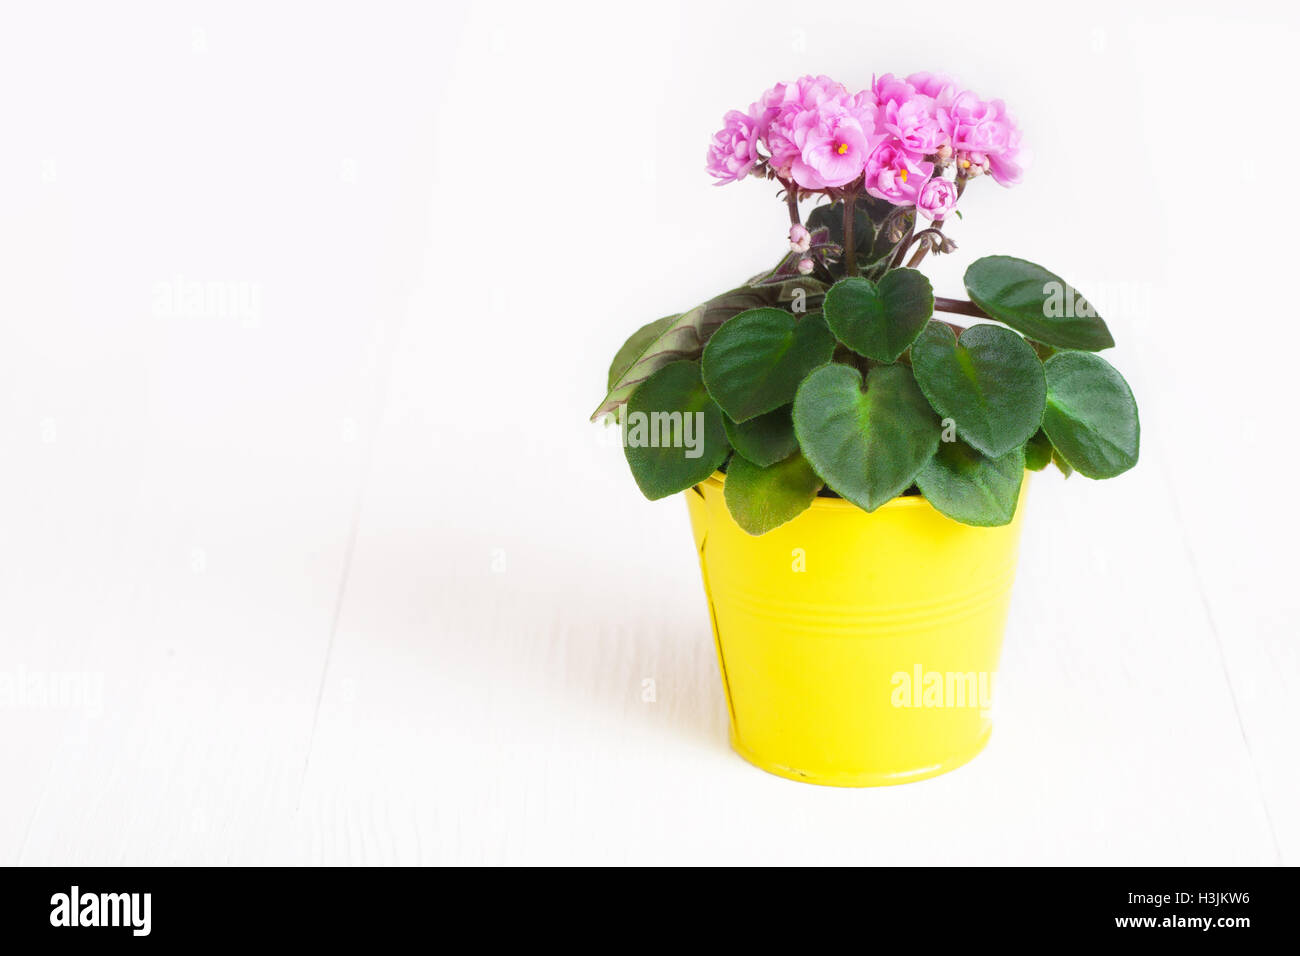 Pink Saintpaulia in a yellow flowerpot on white background close up Stock Photo